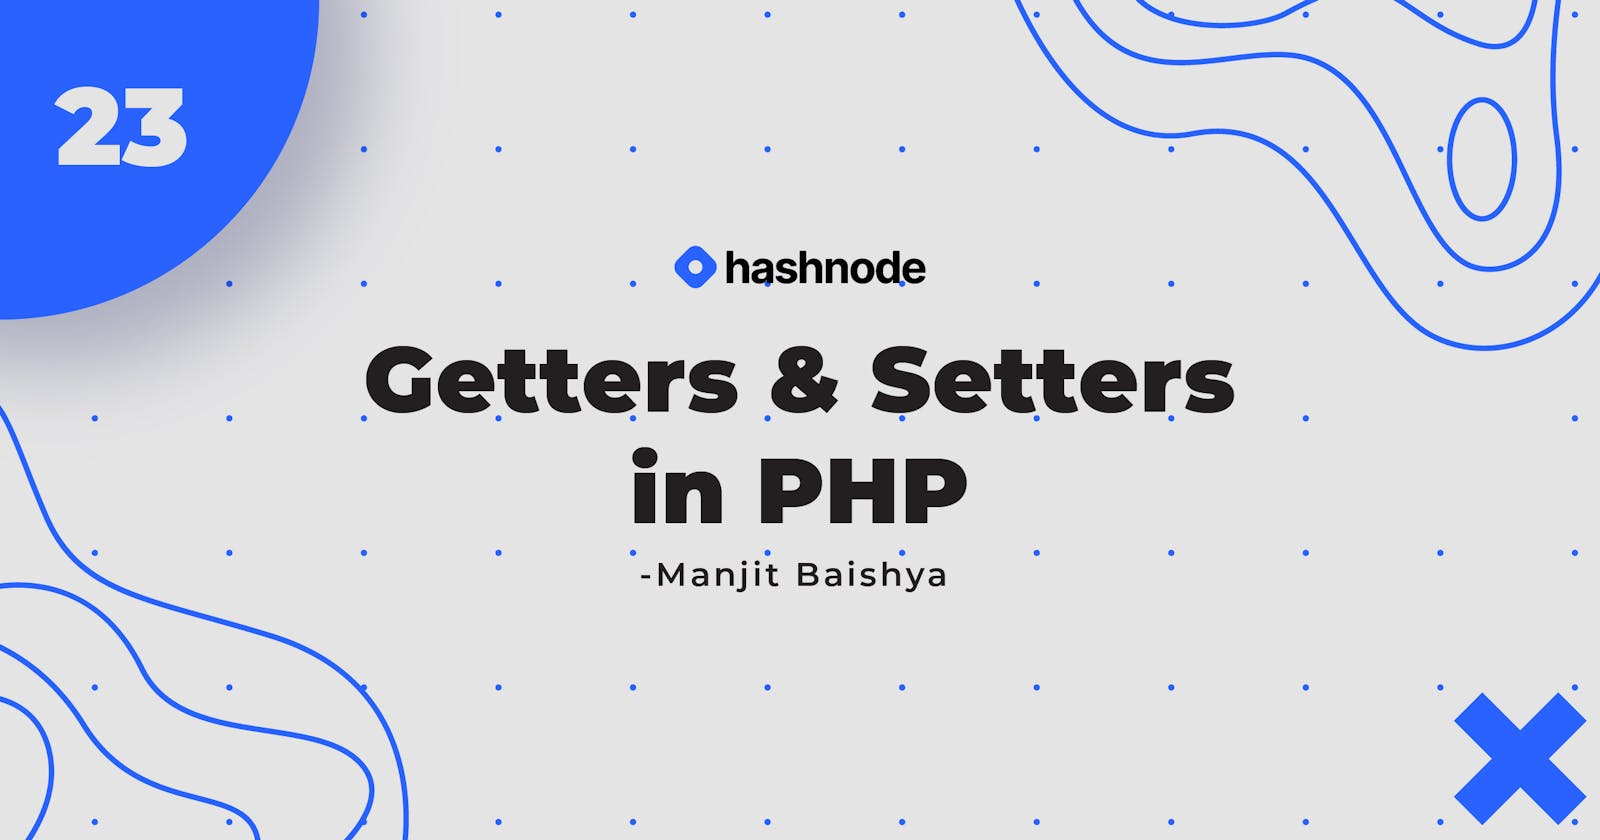 Day 23: Getters & Setters in PHP